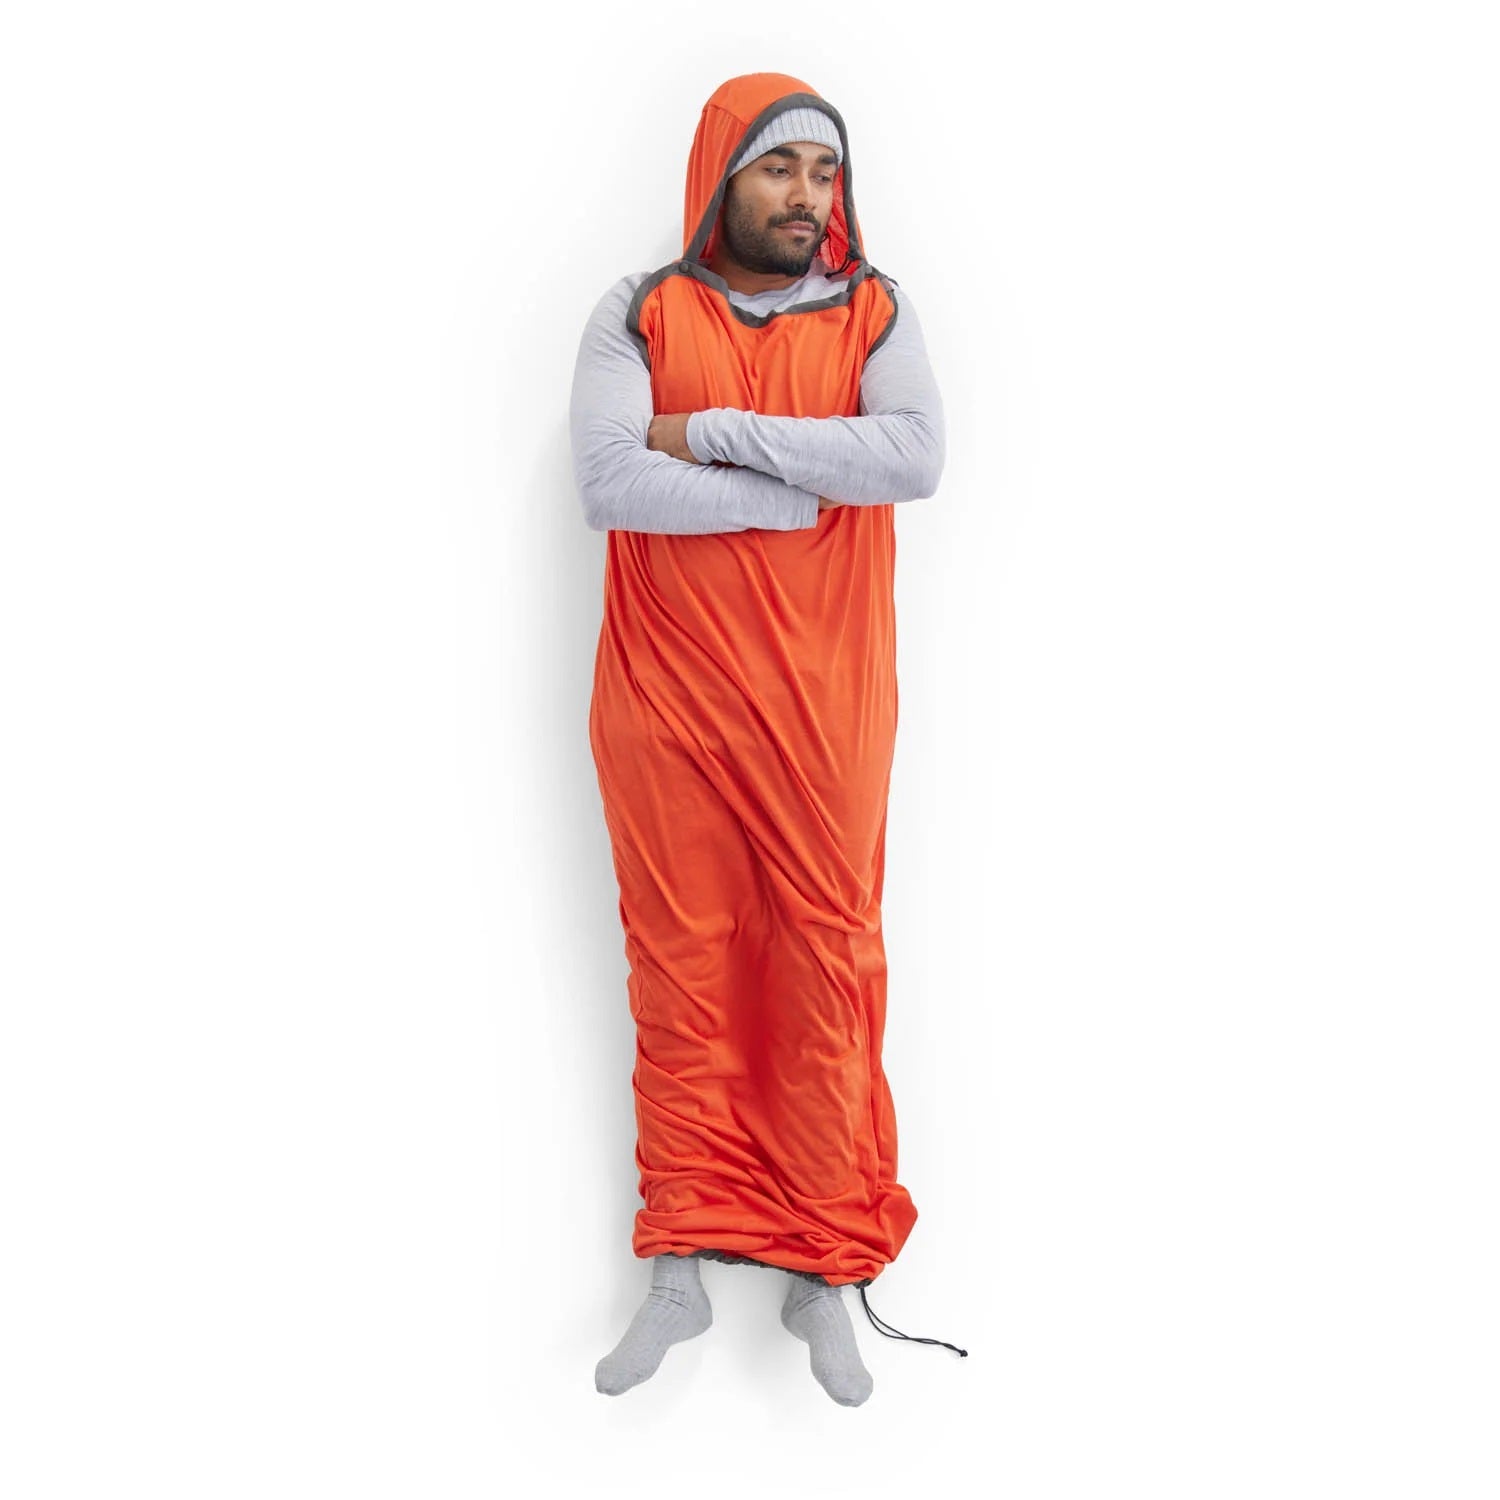 Sea to Summit Sea To Summit Reactor Extreme Sleeping Bag Liner - Mummy Shape with Drawcord